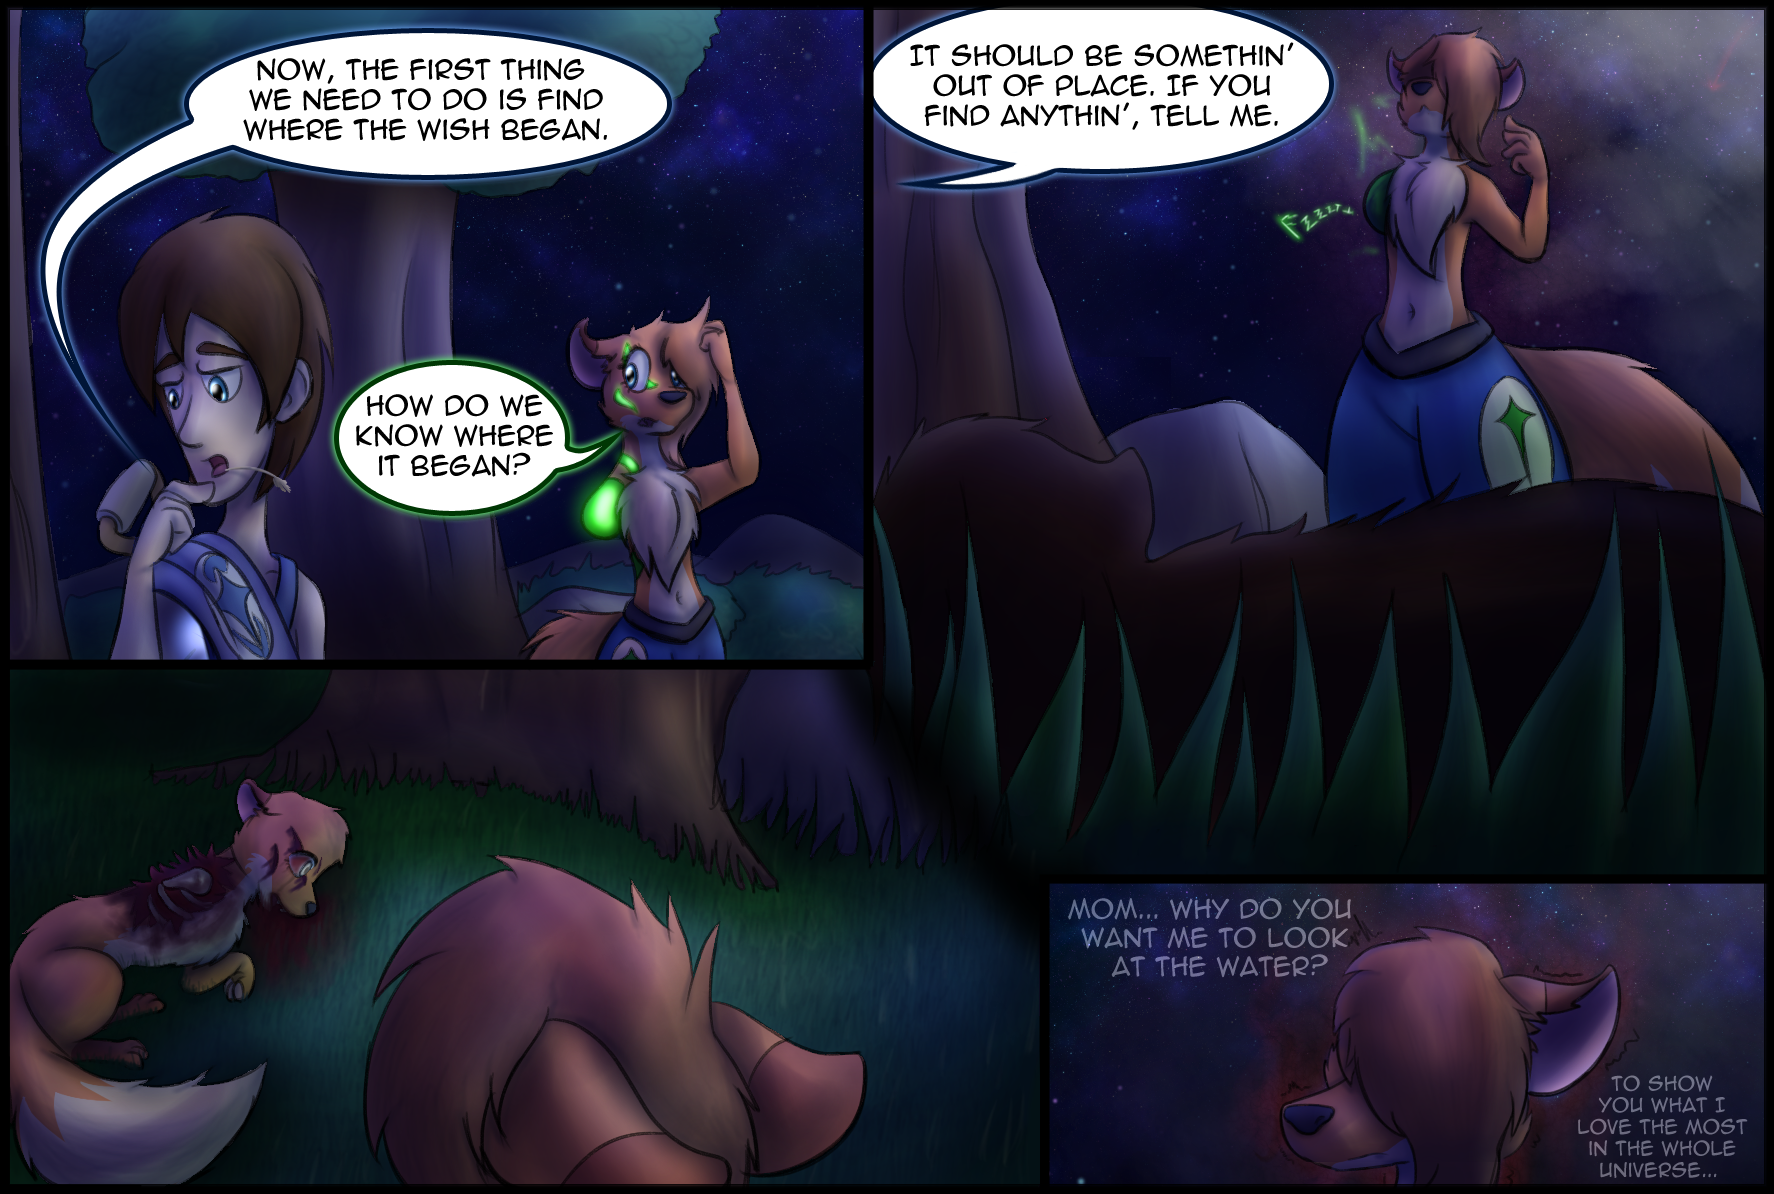 Ch2 Page 4 – Out of Place